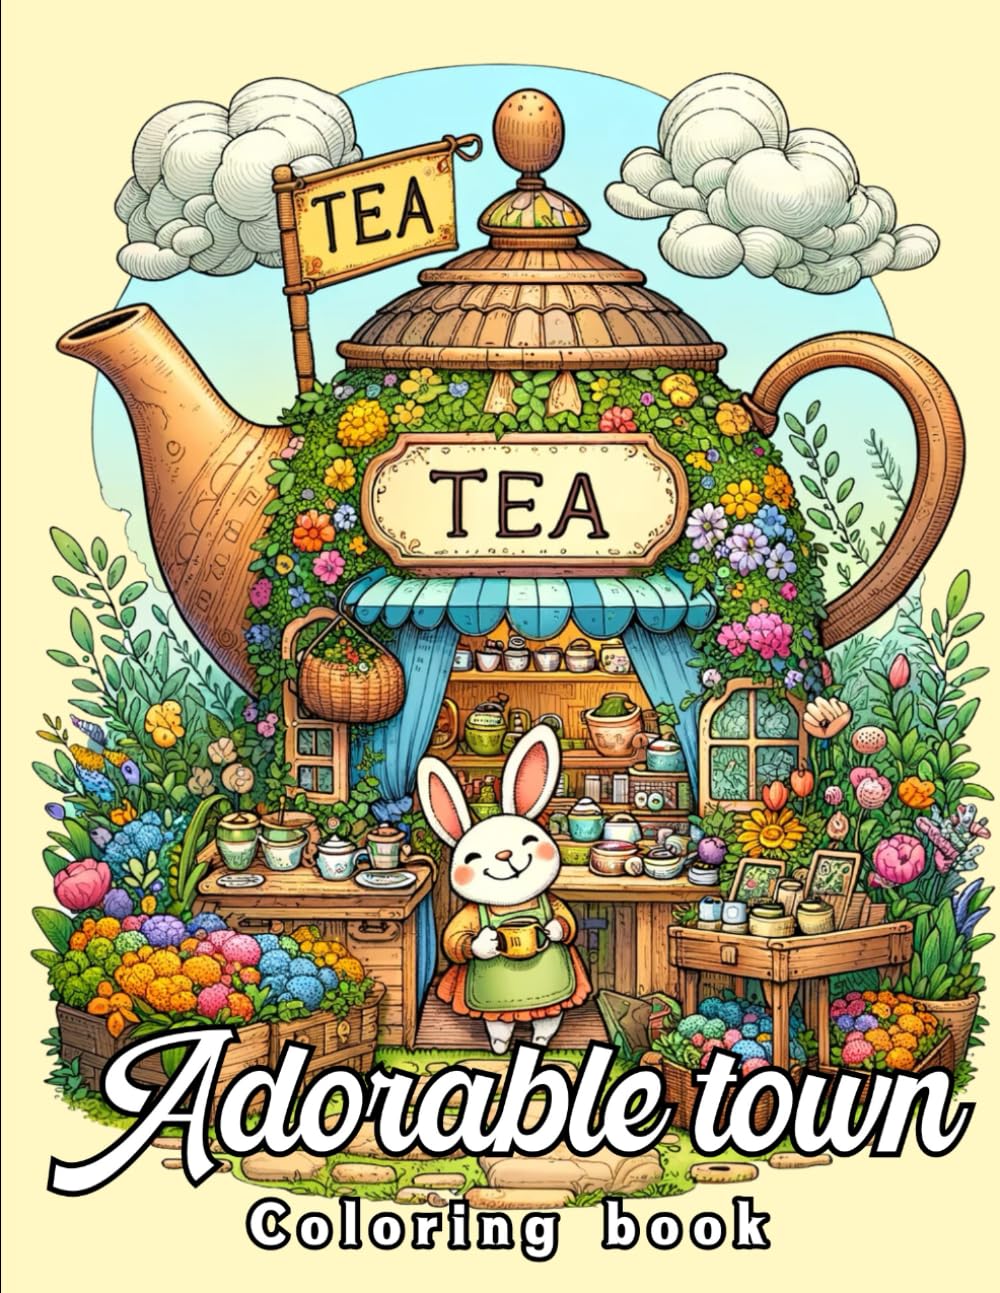 Adorable Town Coloring Book: Adult Cute World Coloring Pages with Tiny Creatures for Relaxation and Stress Relief